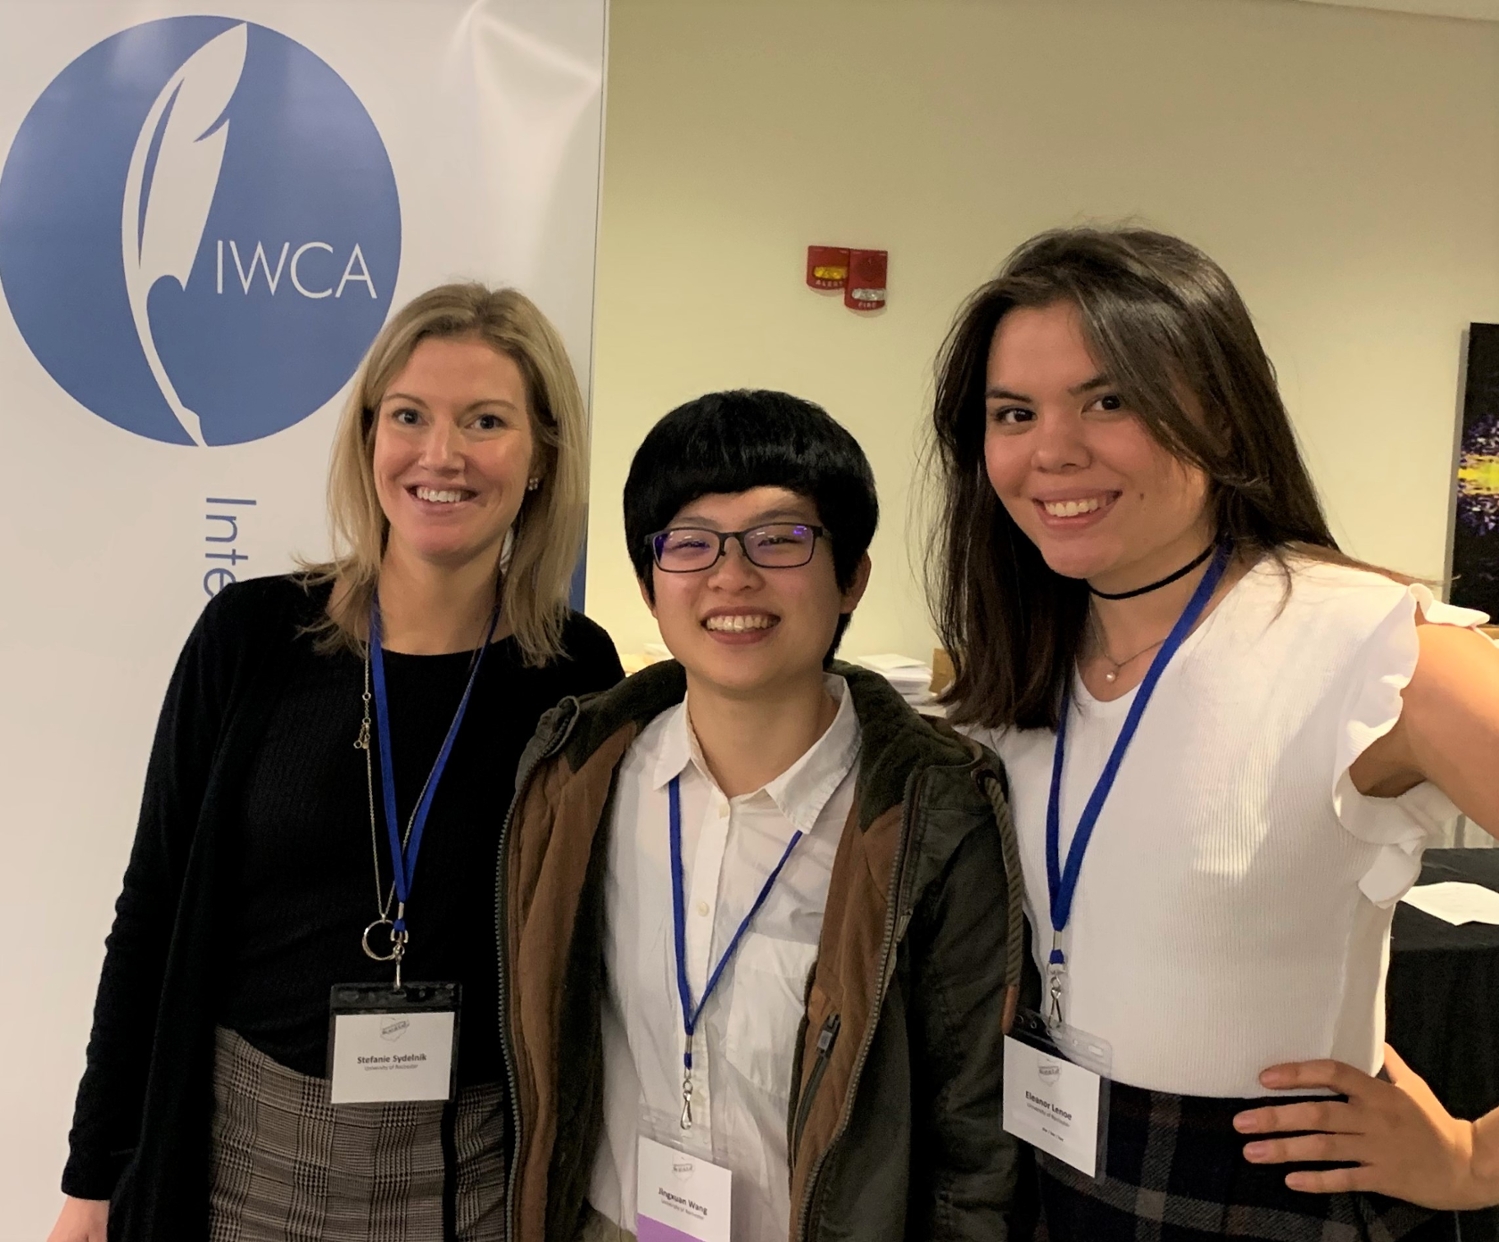 WSAP Associate Director, Stefanie Sydelnik, with Jingxuan Wang '20 and Eleanor Lenoe '21 at the International Writing Centers Association 2019 Conference